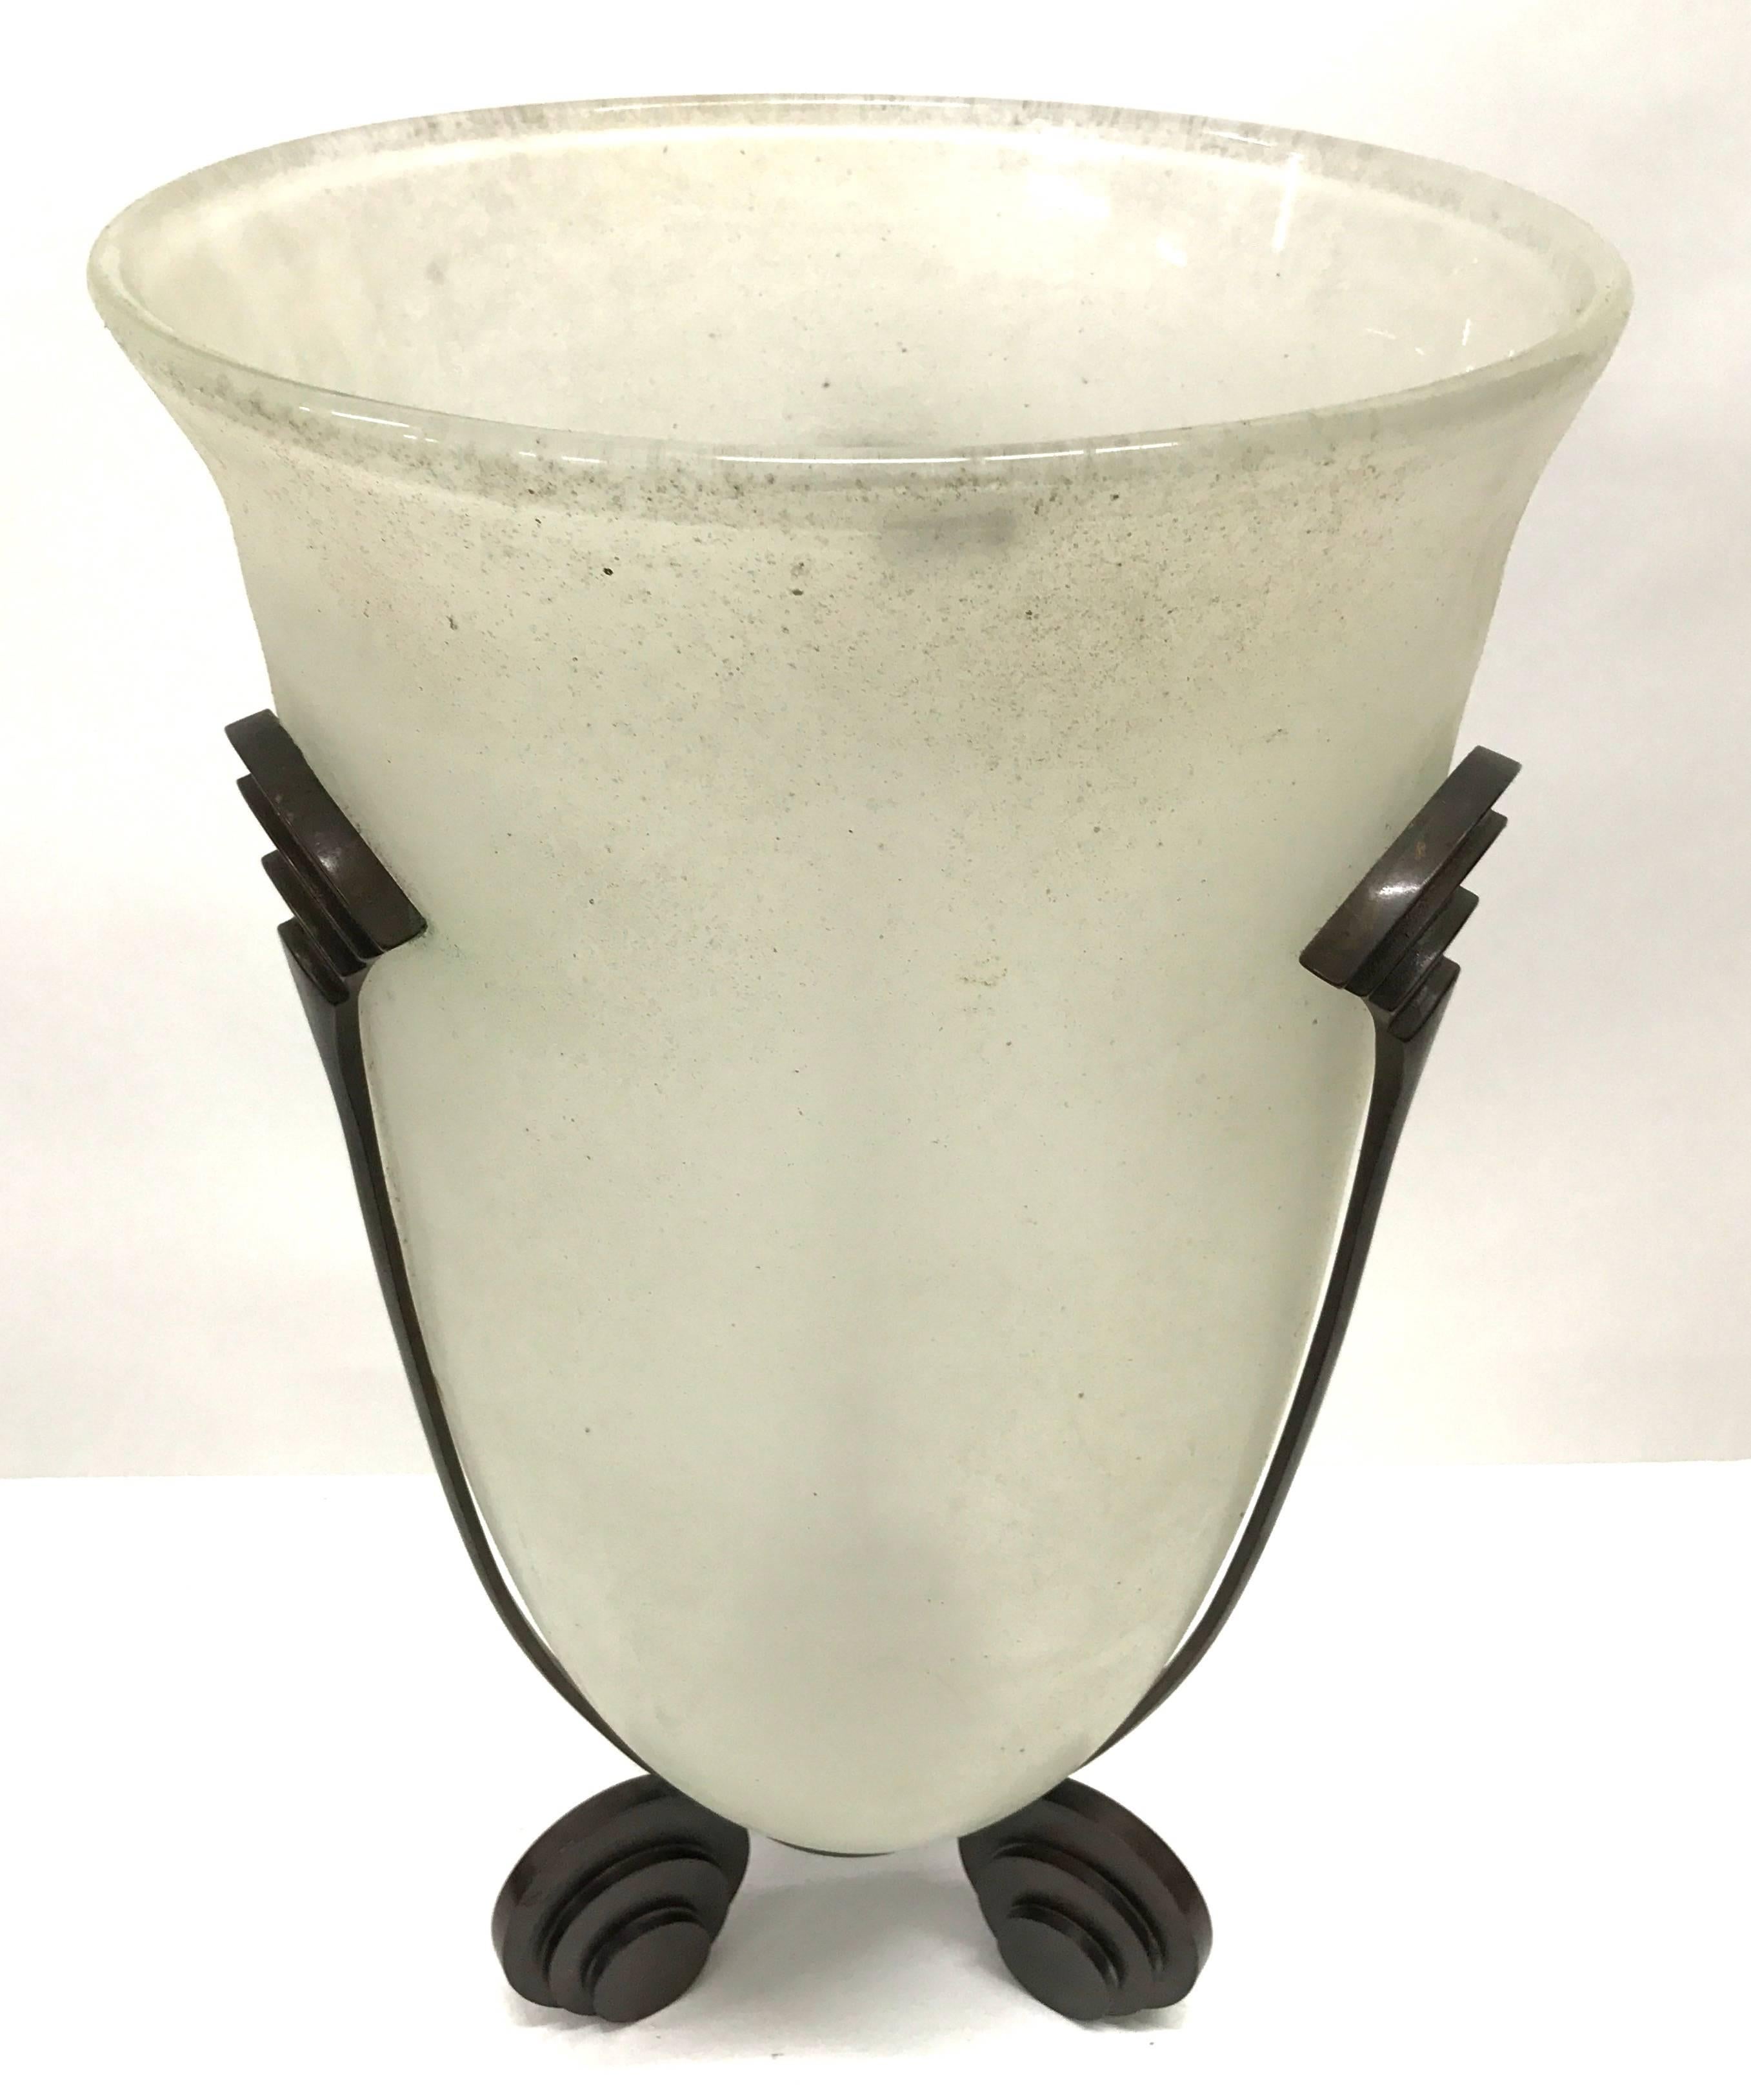 Monumental Seguso glass vase within a bronze stand by Karl Springer. Incised "Karl Springer" signature on the exterior bottom side of the glass vase, along with the Seguso label to the interior, 1980s